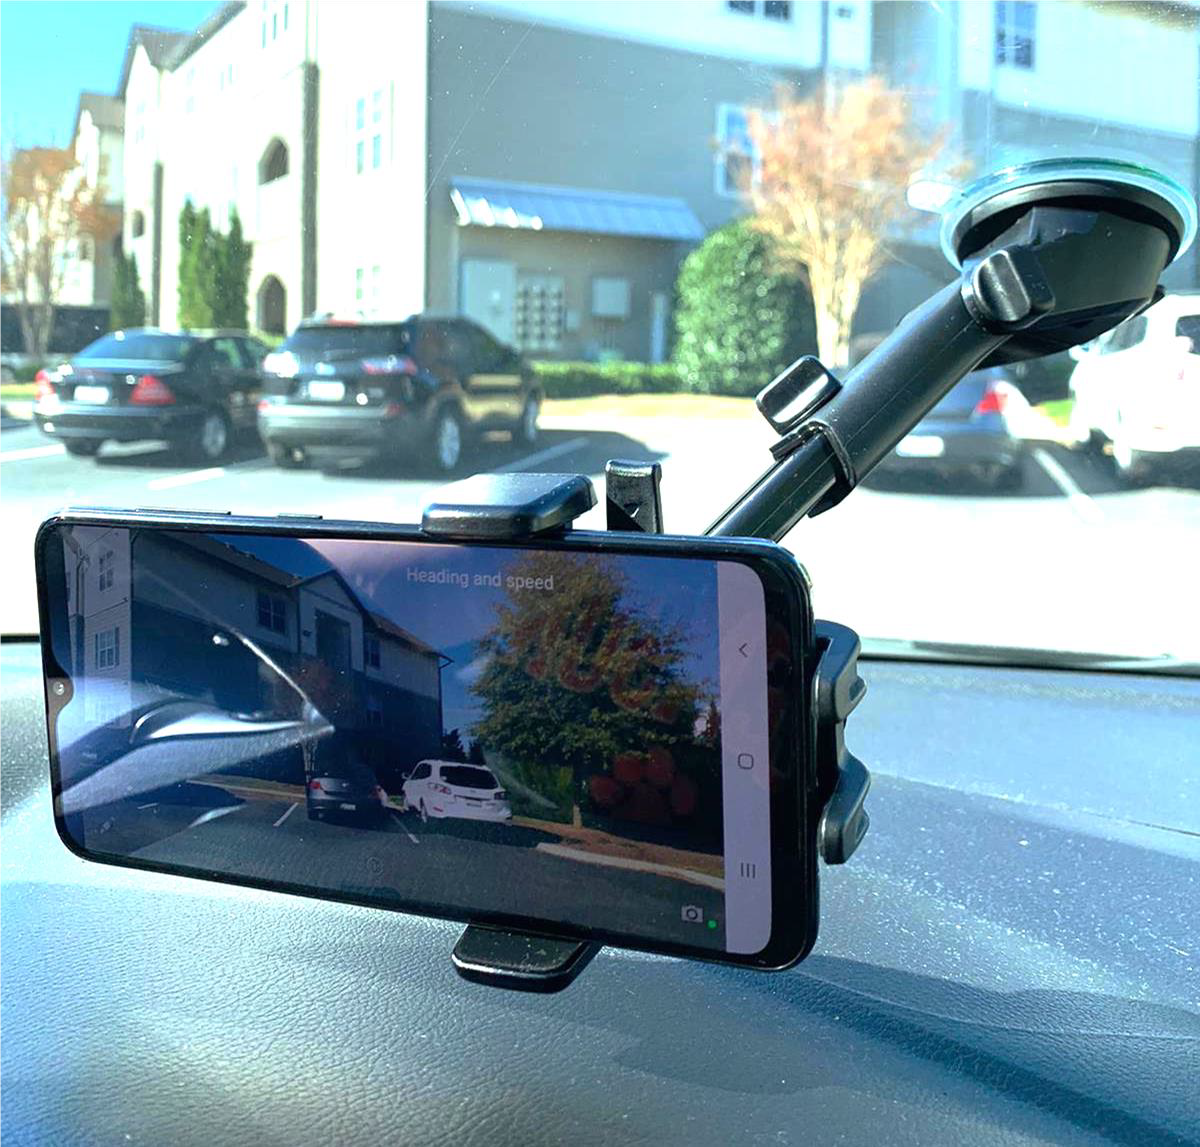 Data Collection Using Smartphone Mounted in the Vehicle